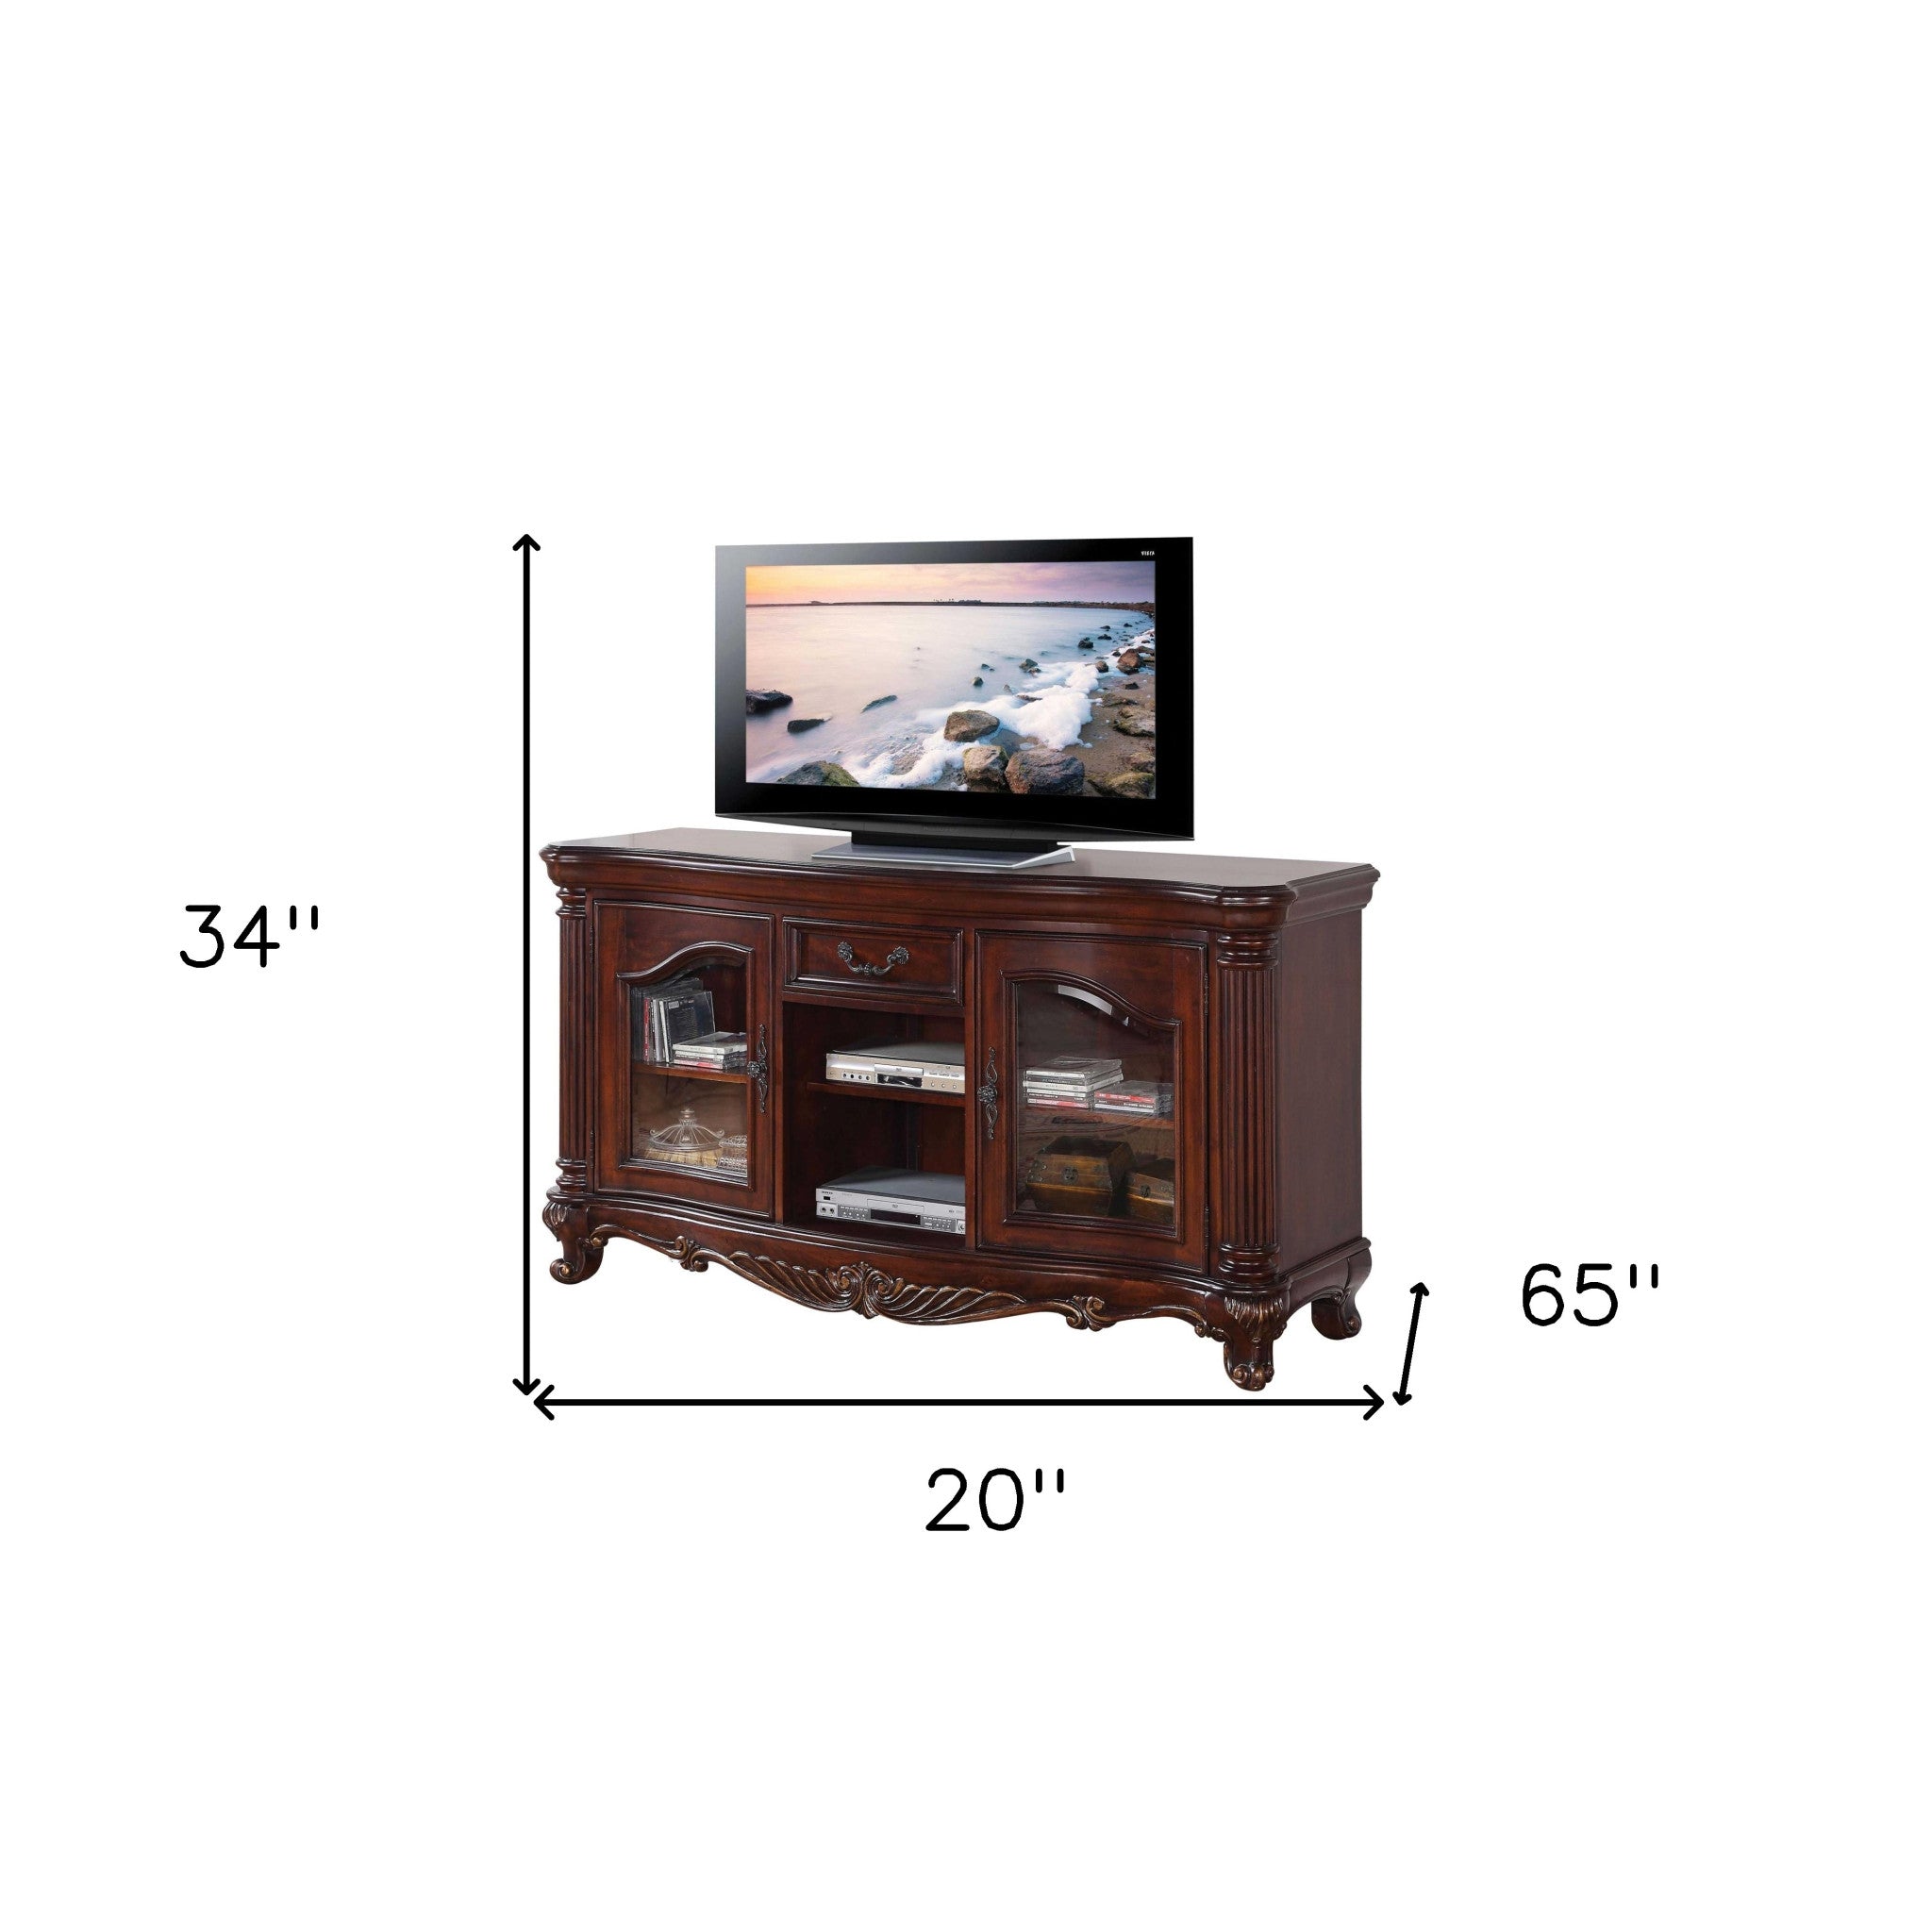 20" Brown Cabinet Enclosed Storage TV Stand with Bookcase